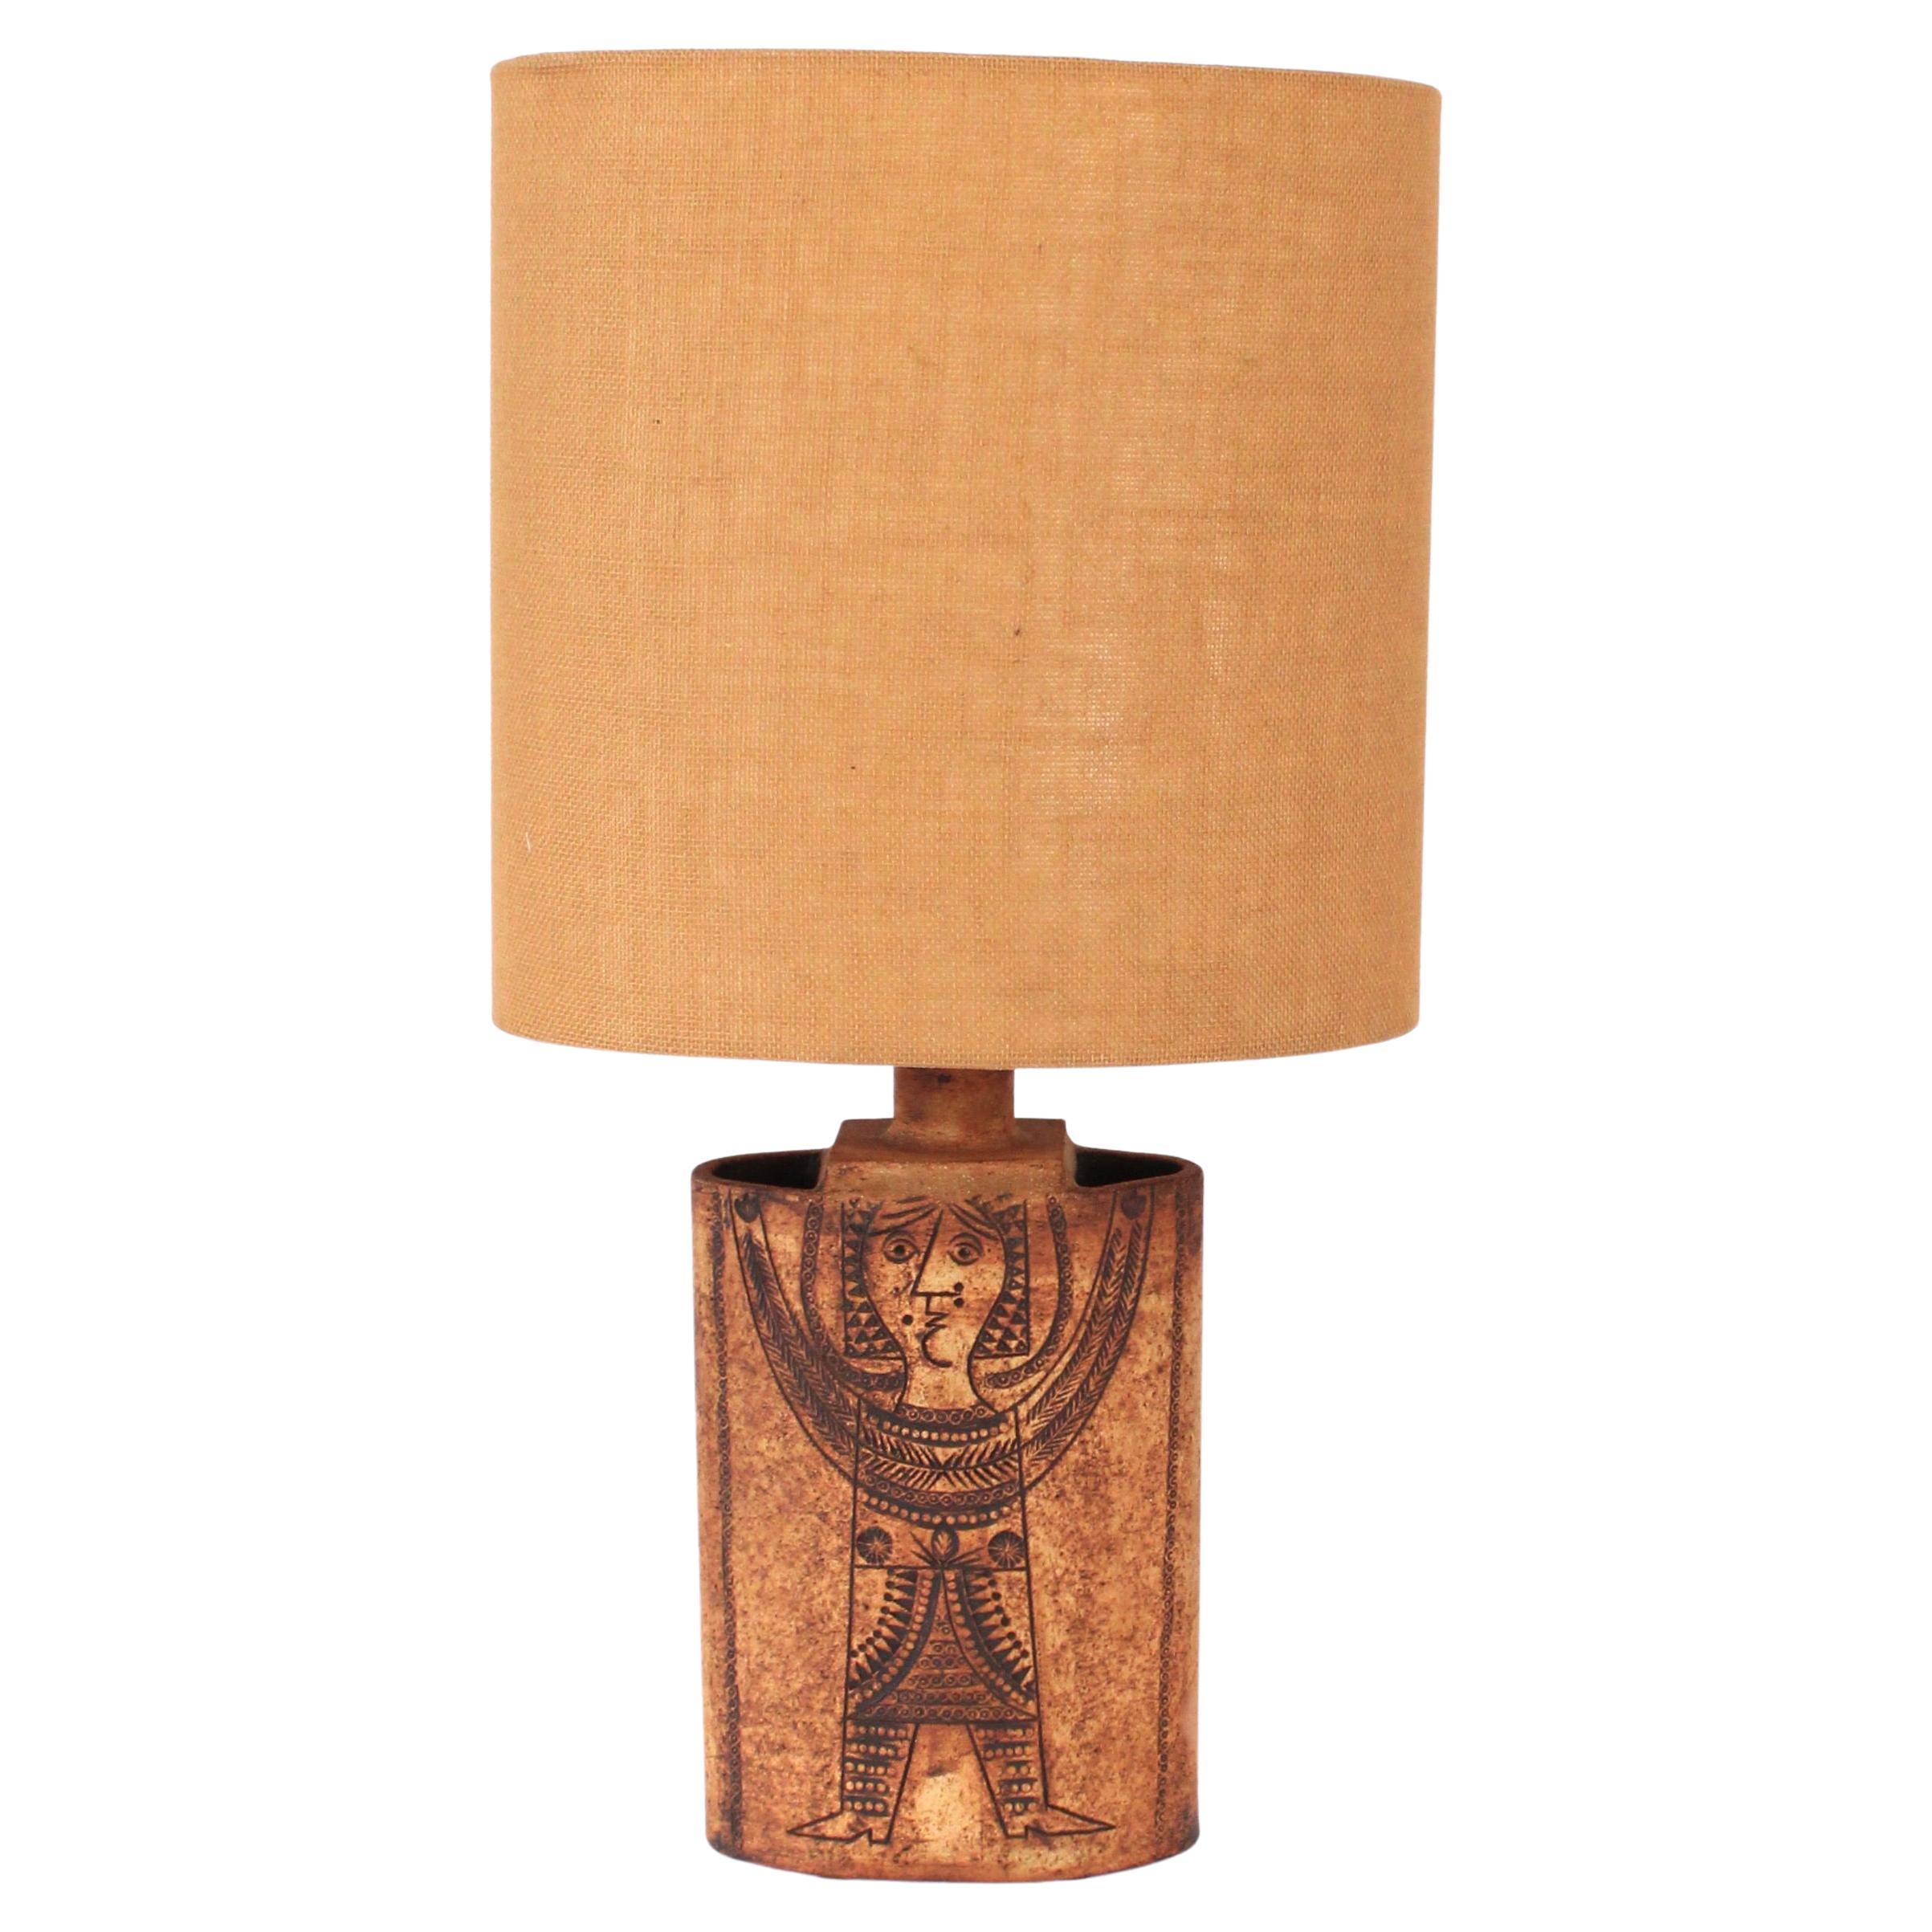 Roger Capron French Ceramic Table Lamp Ochre Incised Figure Decoration Vallauris For Sale